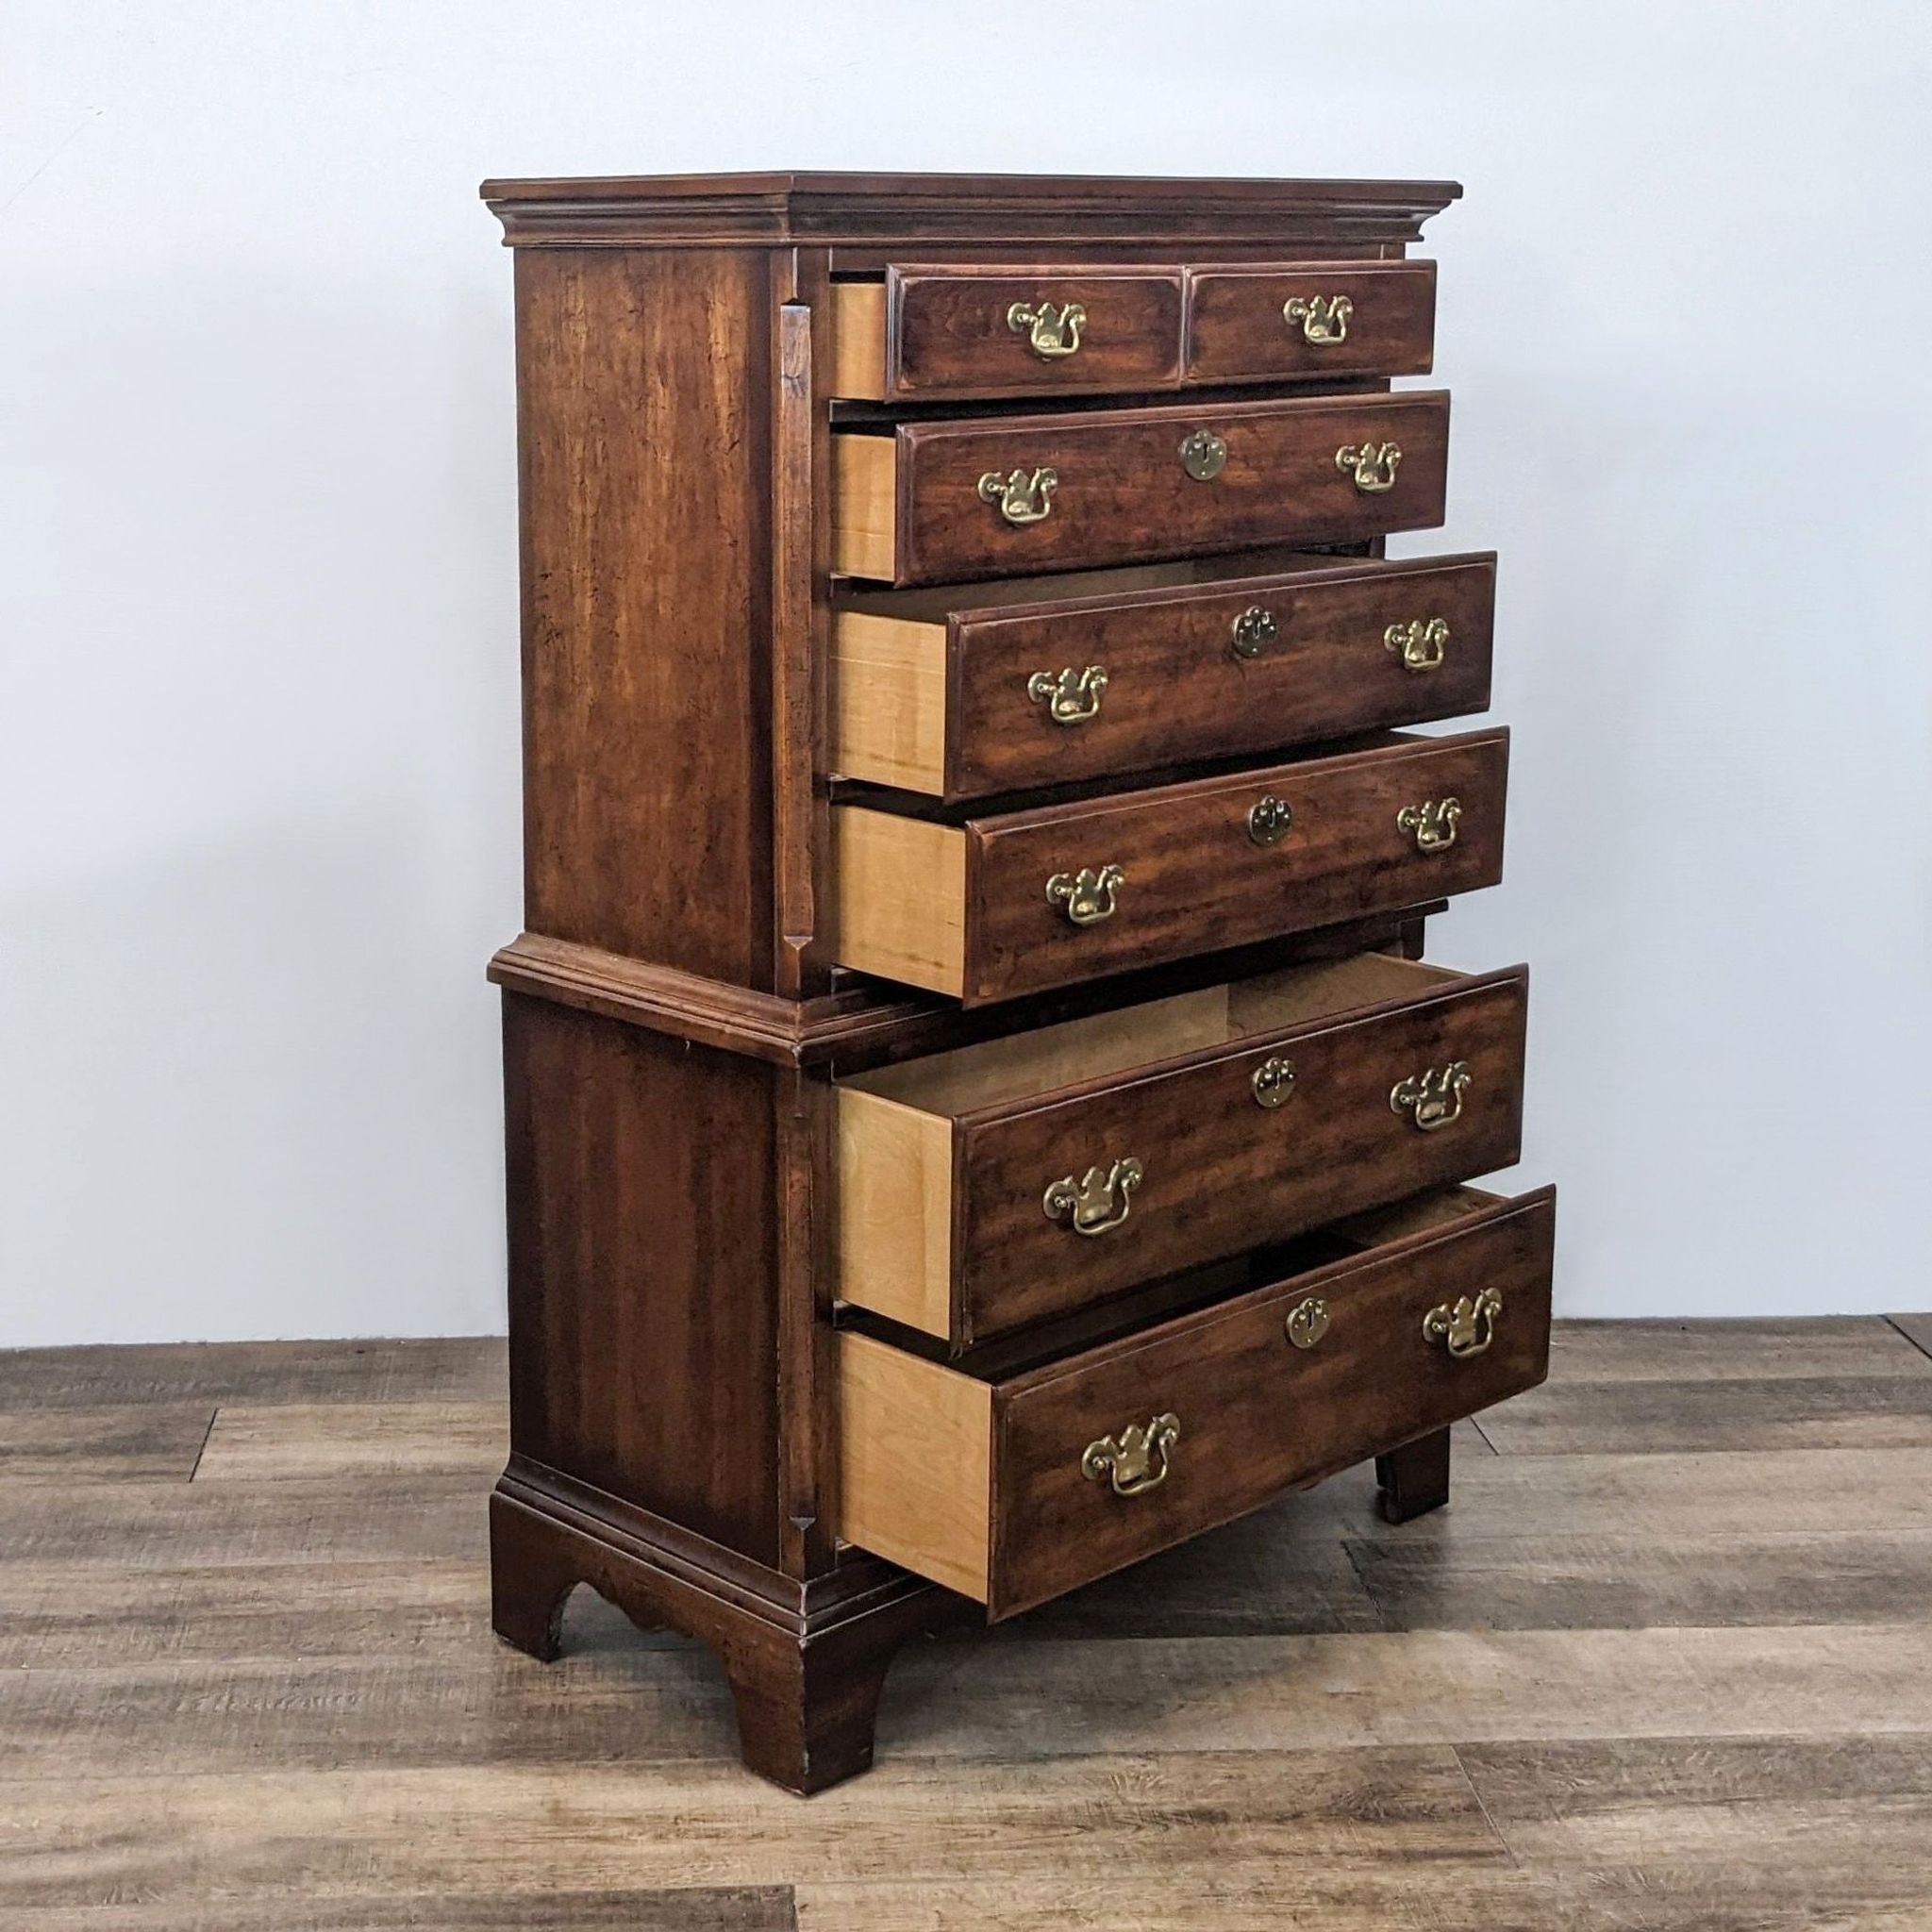 Six-drawer Reperch wooden highboy dresser, drawers partially open showing interior, antique brass pulls.